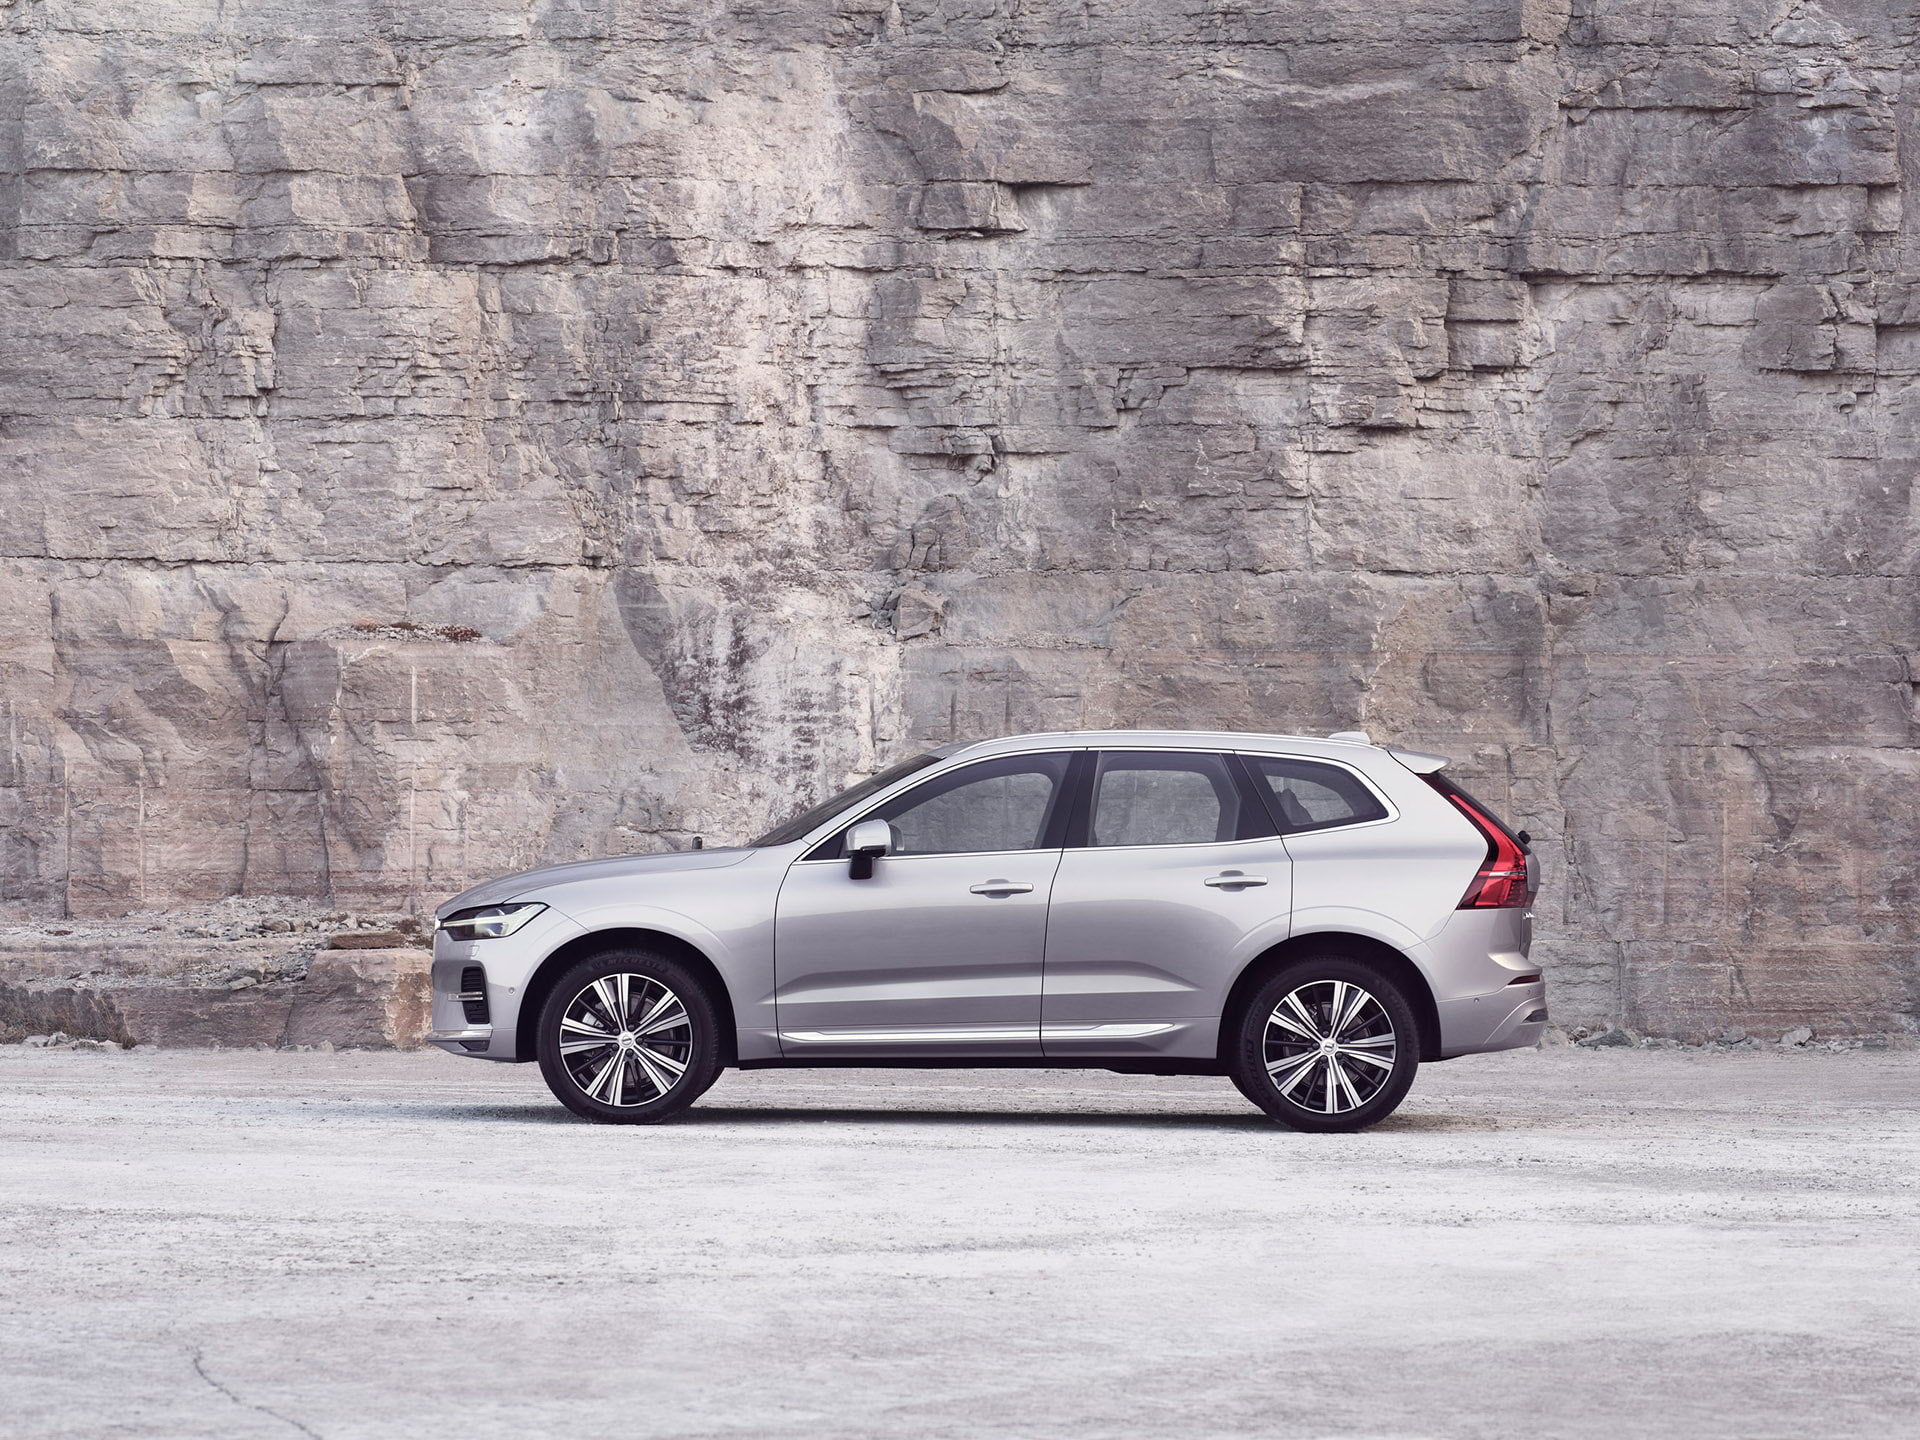 A Volvo XC60 standing still in front of a rock wall.